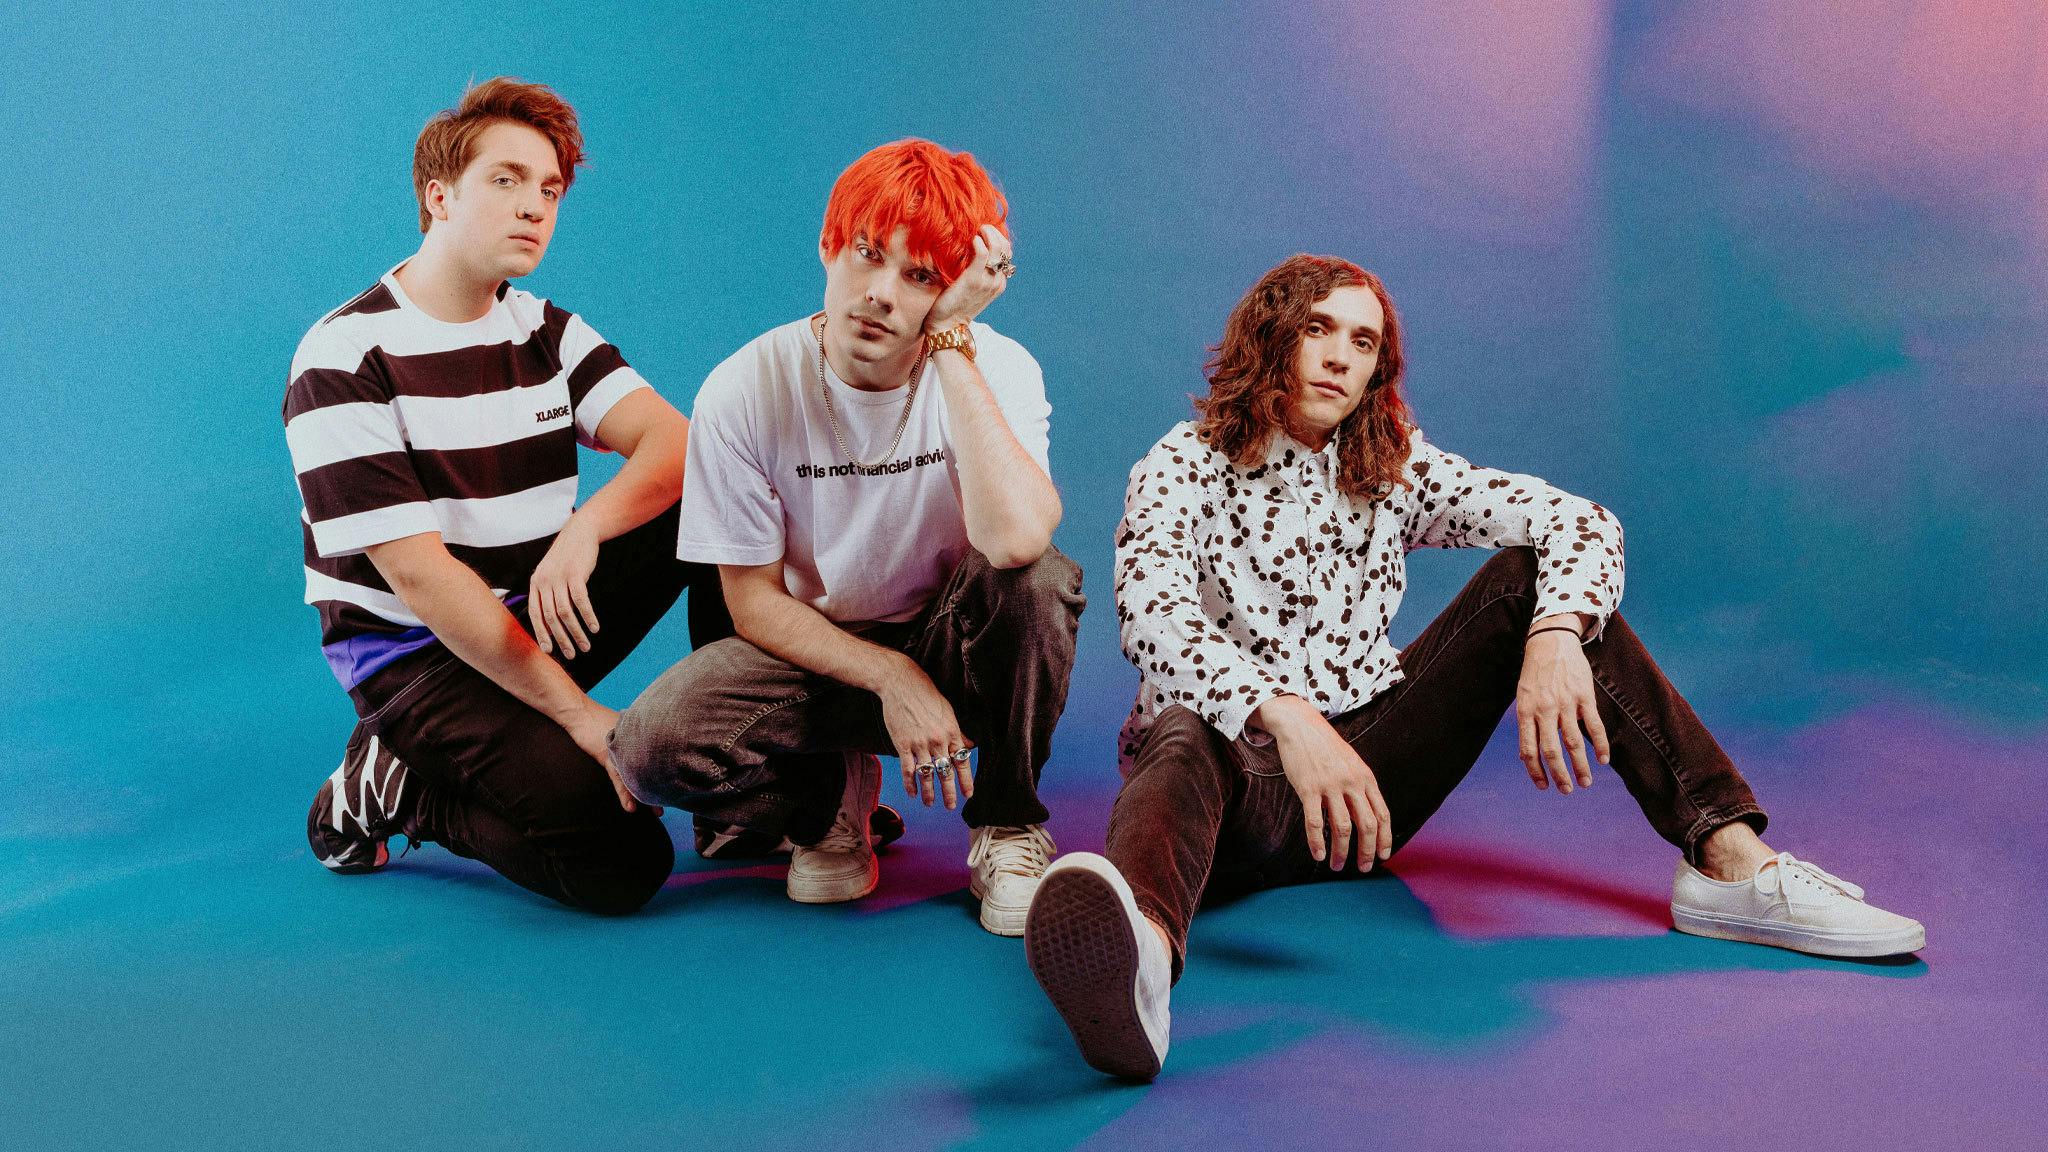 Waterparks: “This is the best version of us – with new and exciting steps forward”